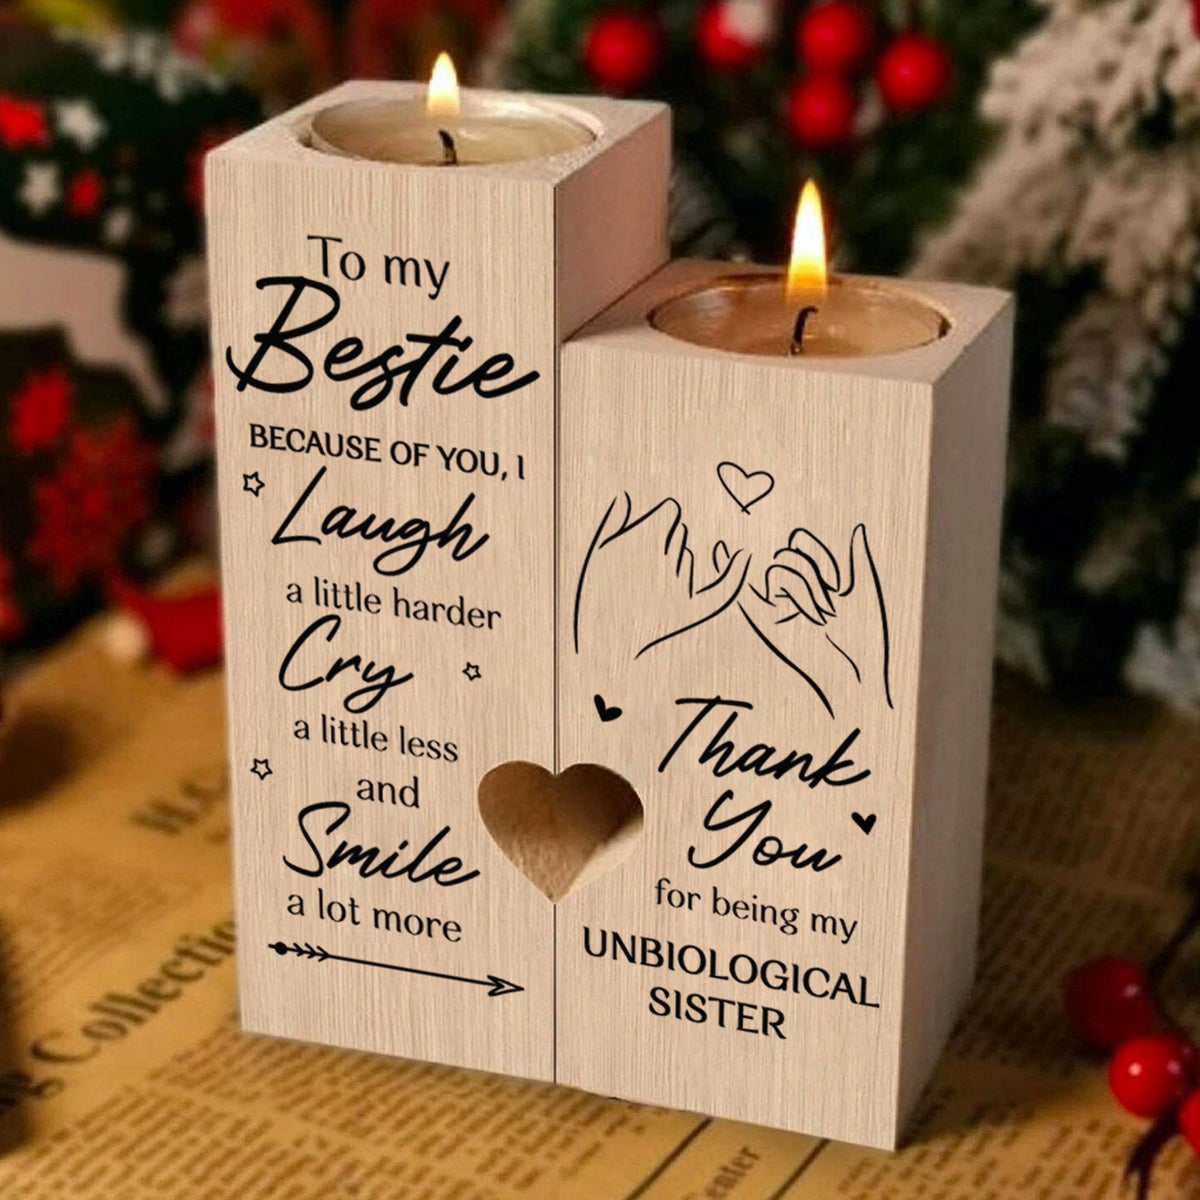 Syfinee Candle Holder with Candle To My Bestie Smile A Lot More Candle Holder with Candle Gifts for Bestie Best Friend